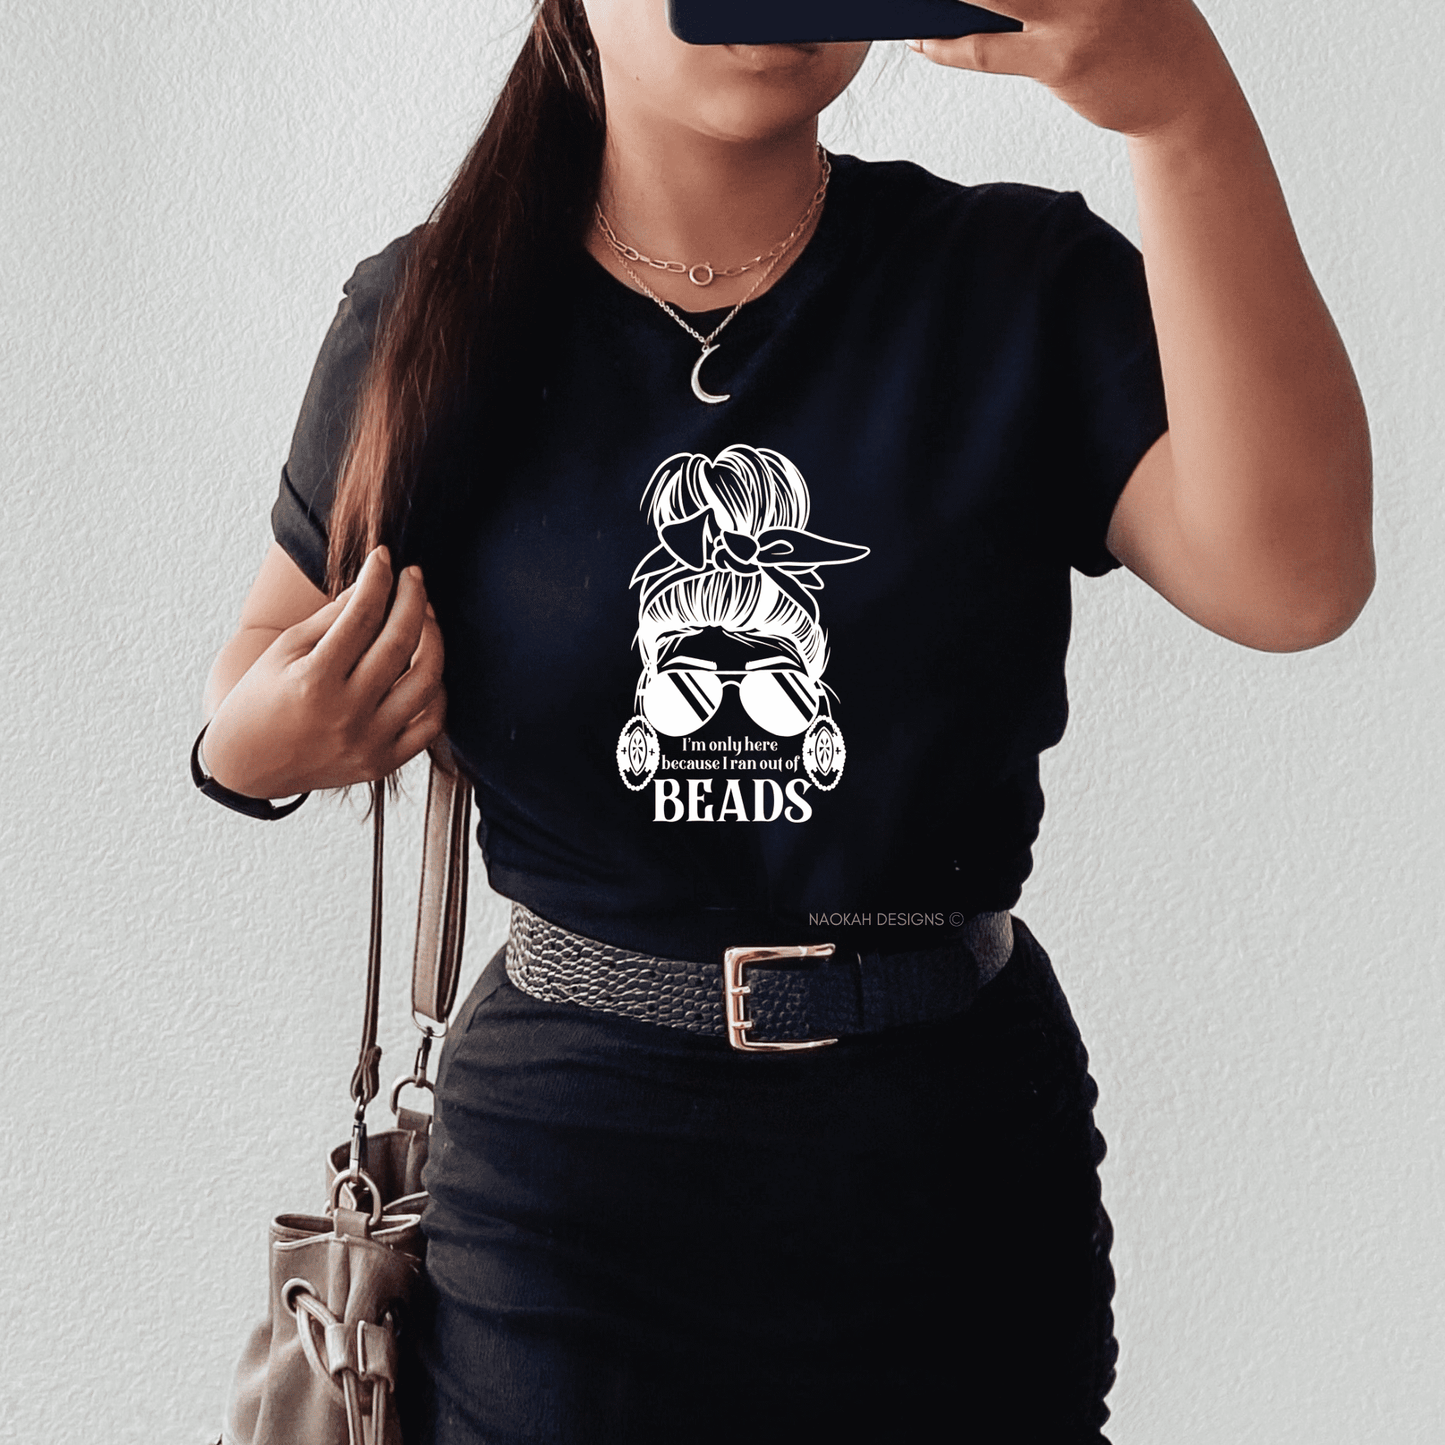 i'm only here because i ran out of beads shirt, indigenous floral shirt, native floral shirt, native indigenous beadworker, indigenous beadwork, indigenous owned shop